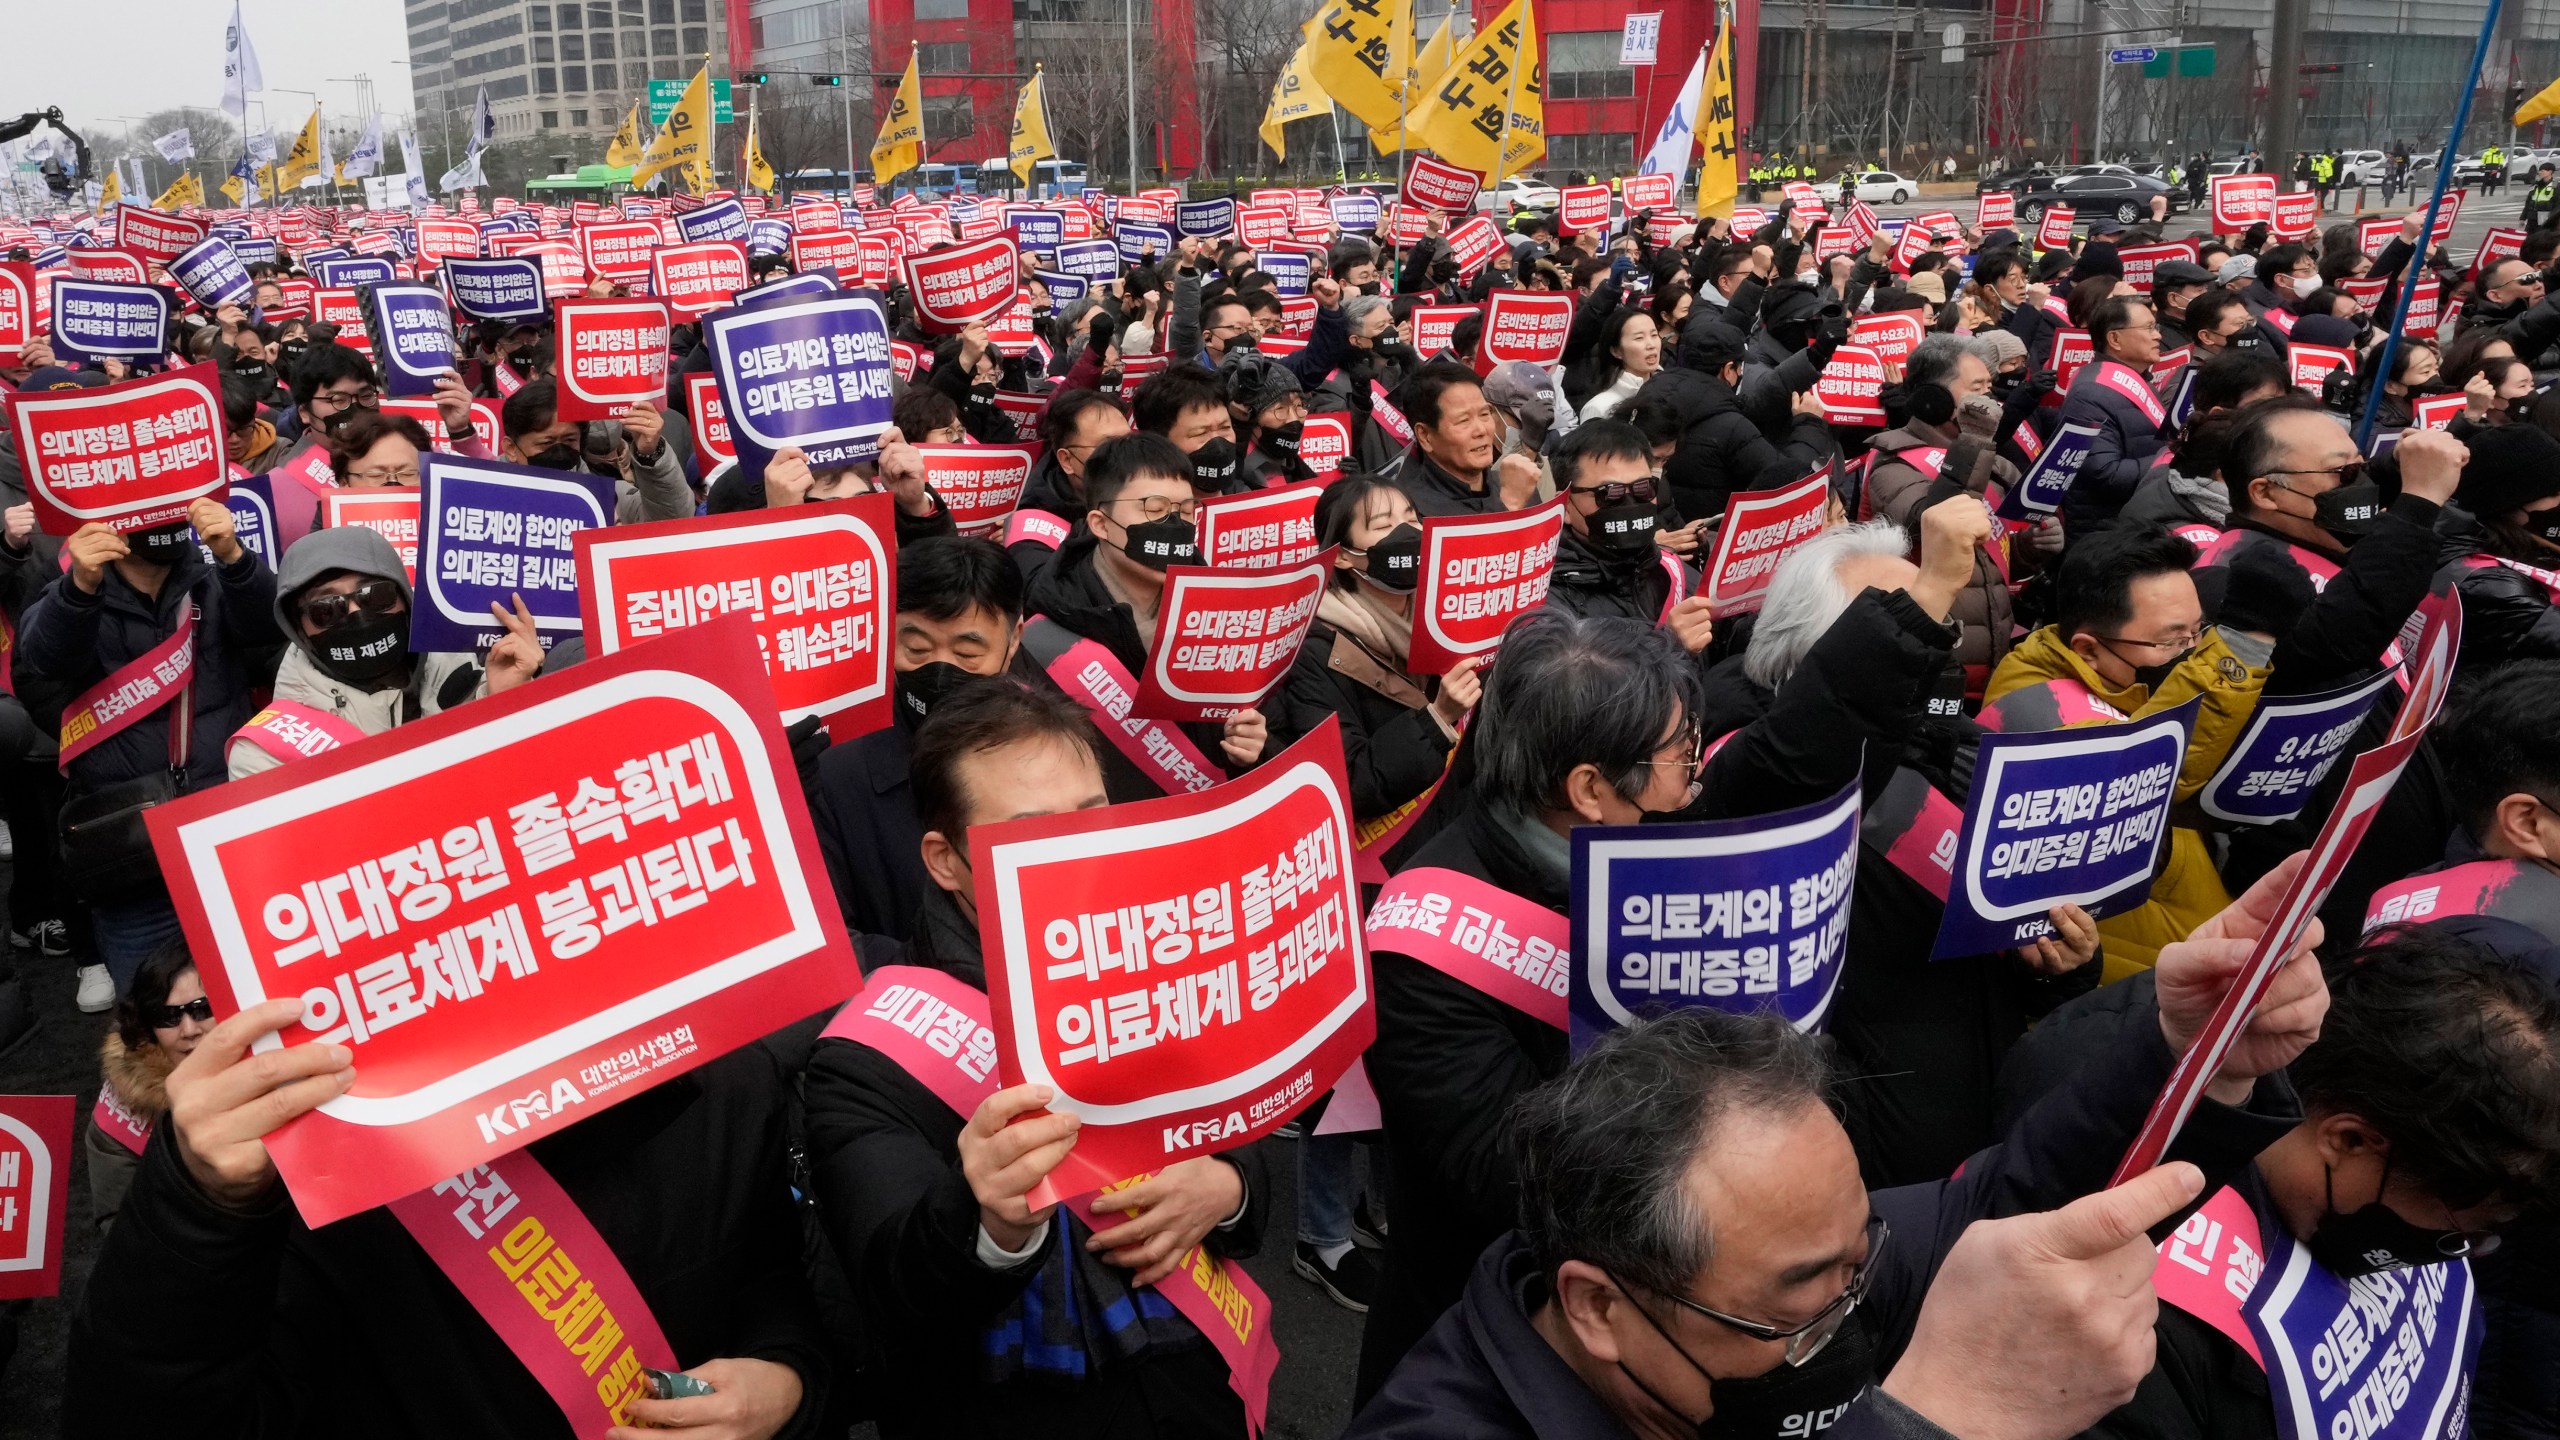 FILE - Doctors stage a rally against the government's medical policy in Seoul, South Korea, on March 3, 2024. South Korean authorities have suspended the licenses of two senior doctors for allegedly inciting the weekslong walkouts by medical interns and residents that disrupted hospital operations across the country. That's according to one of the doctors who spoke to The Associated Press. The suspensions are the government’s first punitive step against physicians after thousands of doctors-in-training walked off the job last month to protest the government’s plan to sharply increase medical school admissions. (AP Photo/Ahn Young-joon, File)